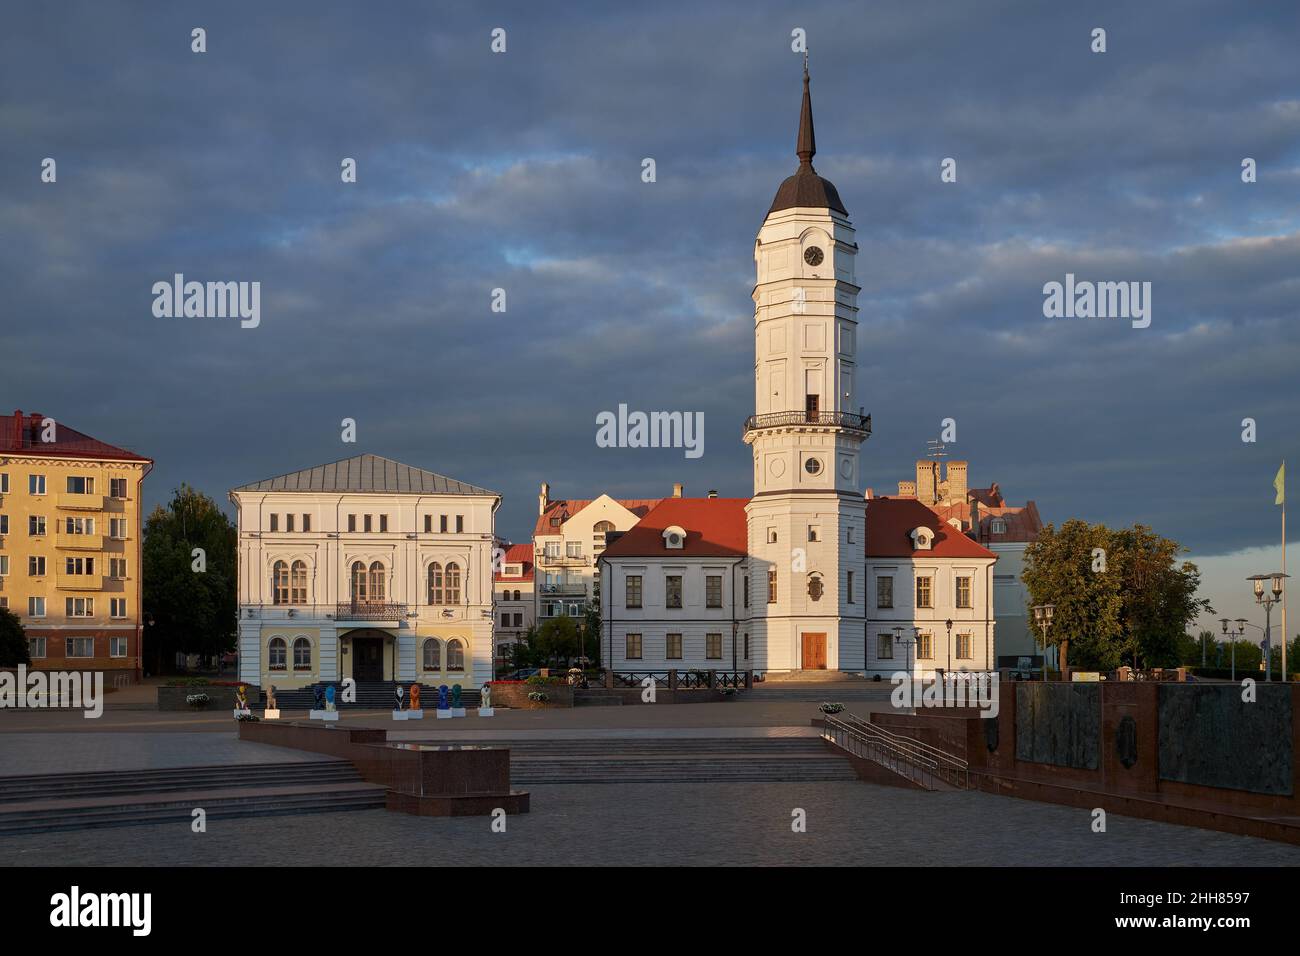 Old Glory Square, ancient town hall. Mogilev, Belarus. Stock Photo